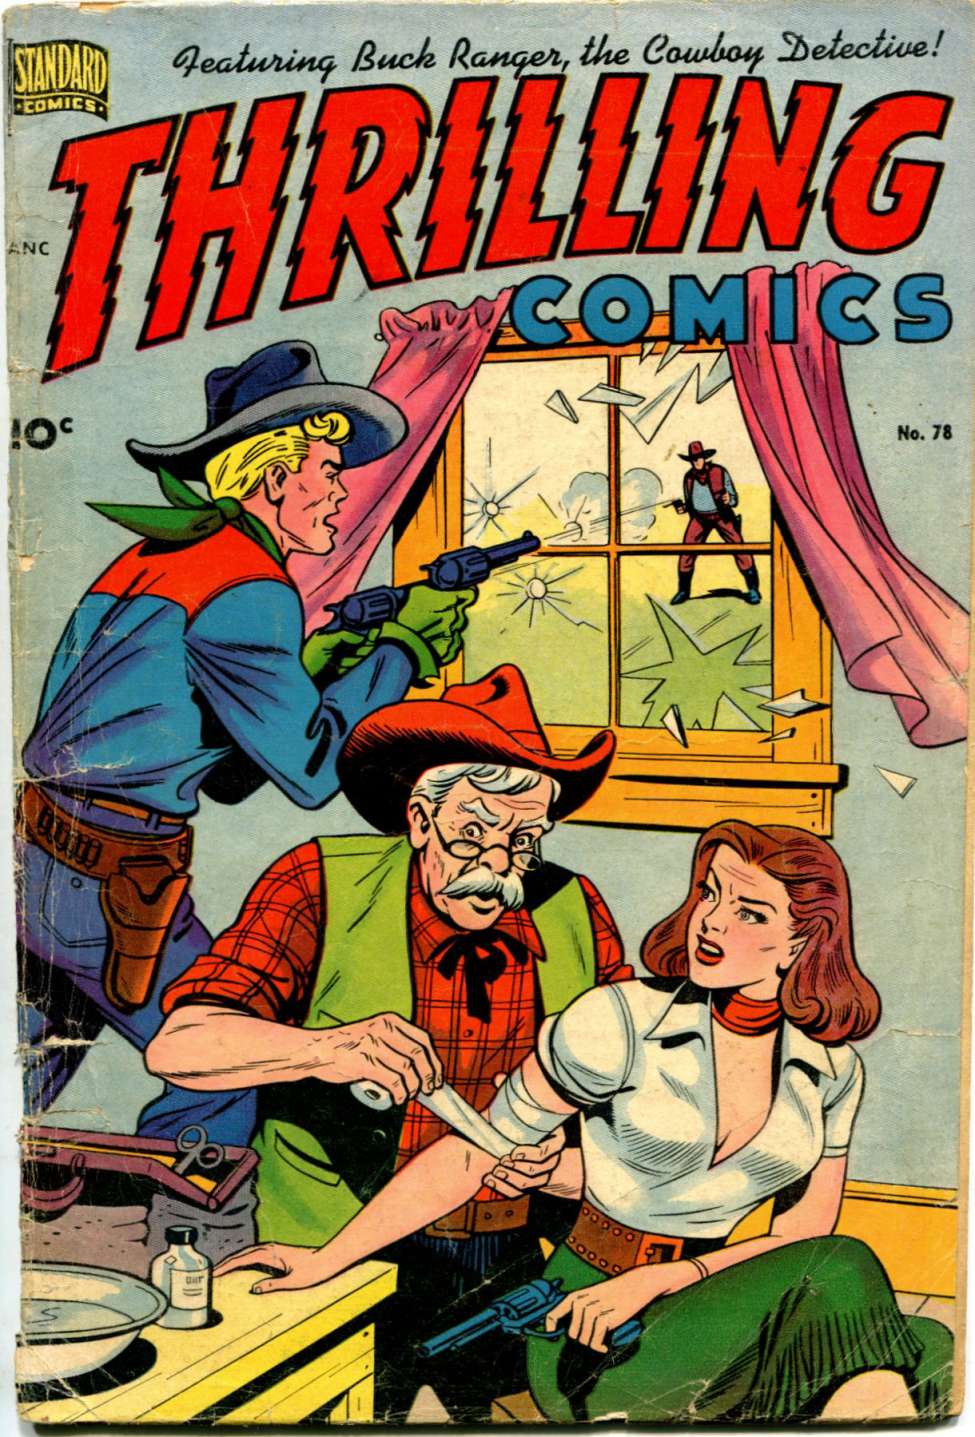 Comic Book Cover For Thrilling Comics 78 - Version 1